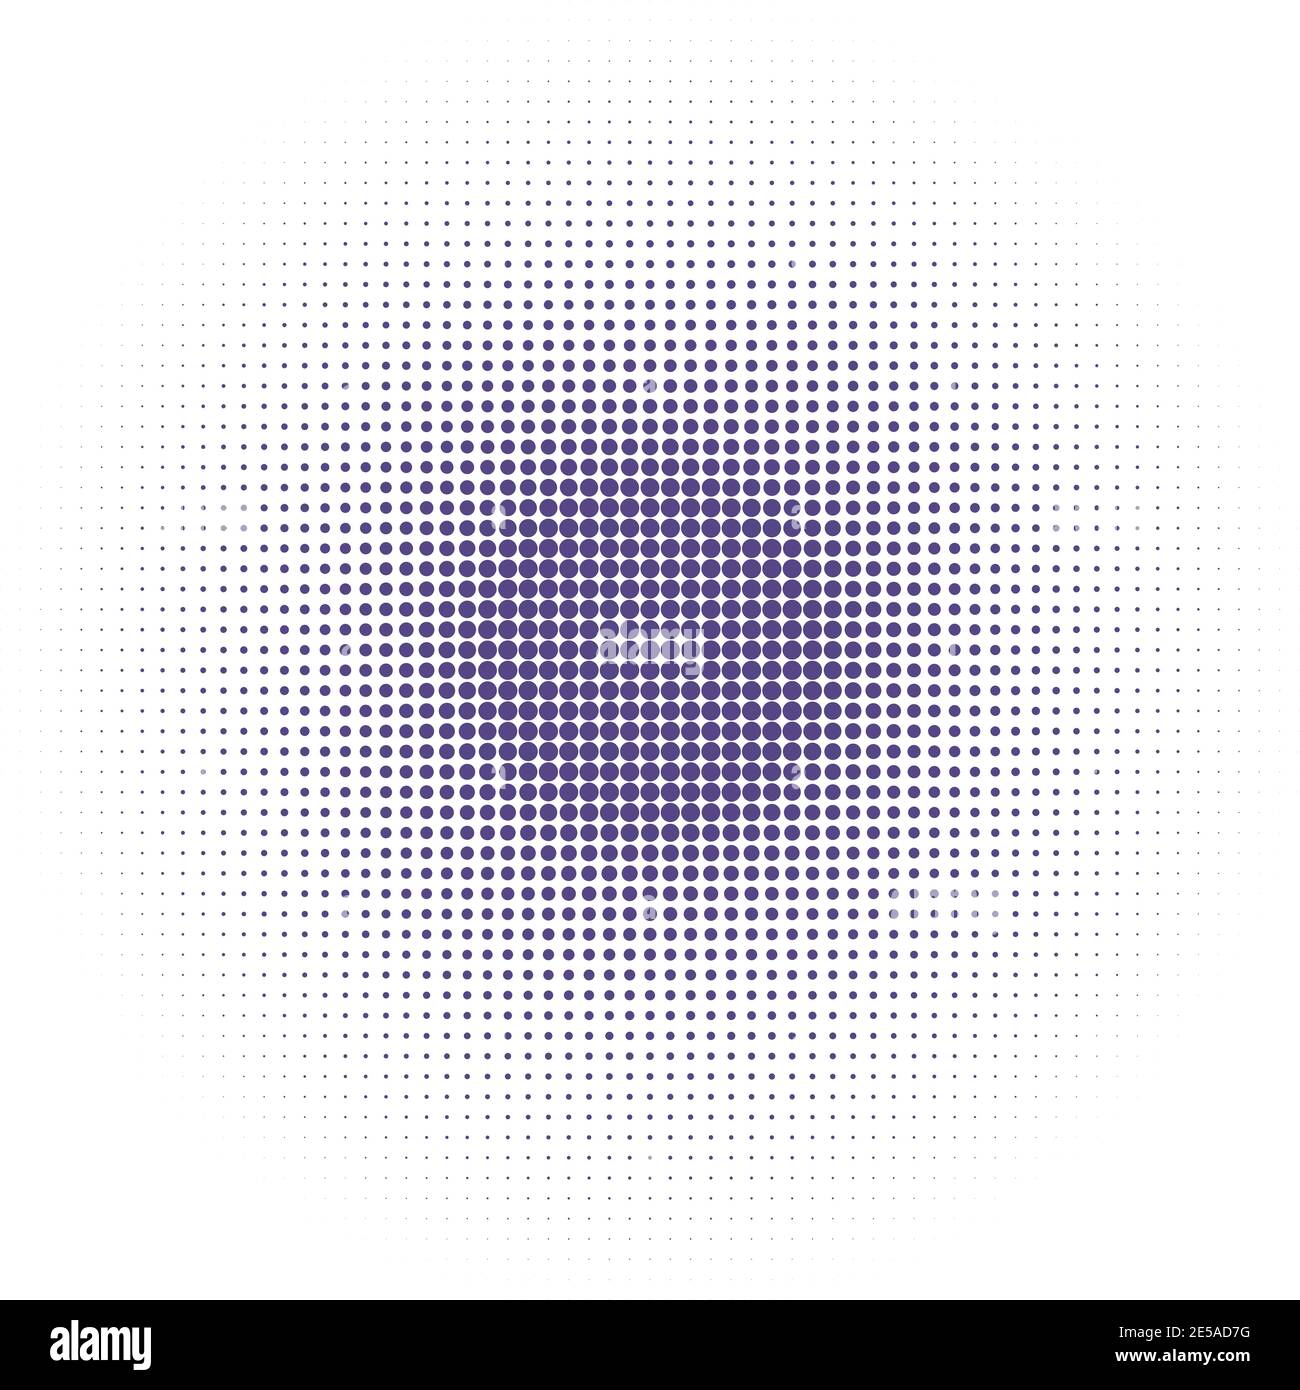 Vector halftone dots background. Ultra violet dots on white background Stock Vector